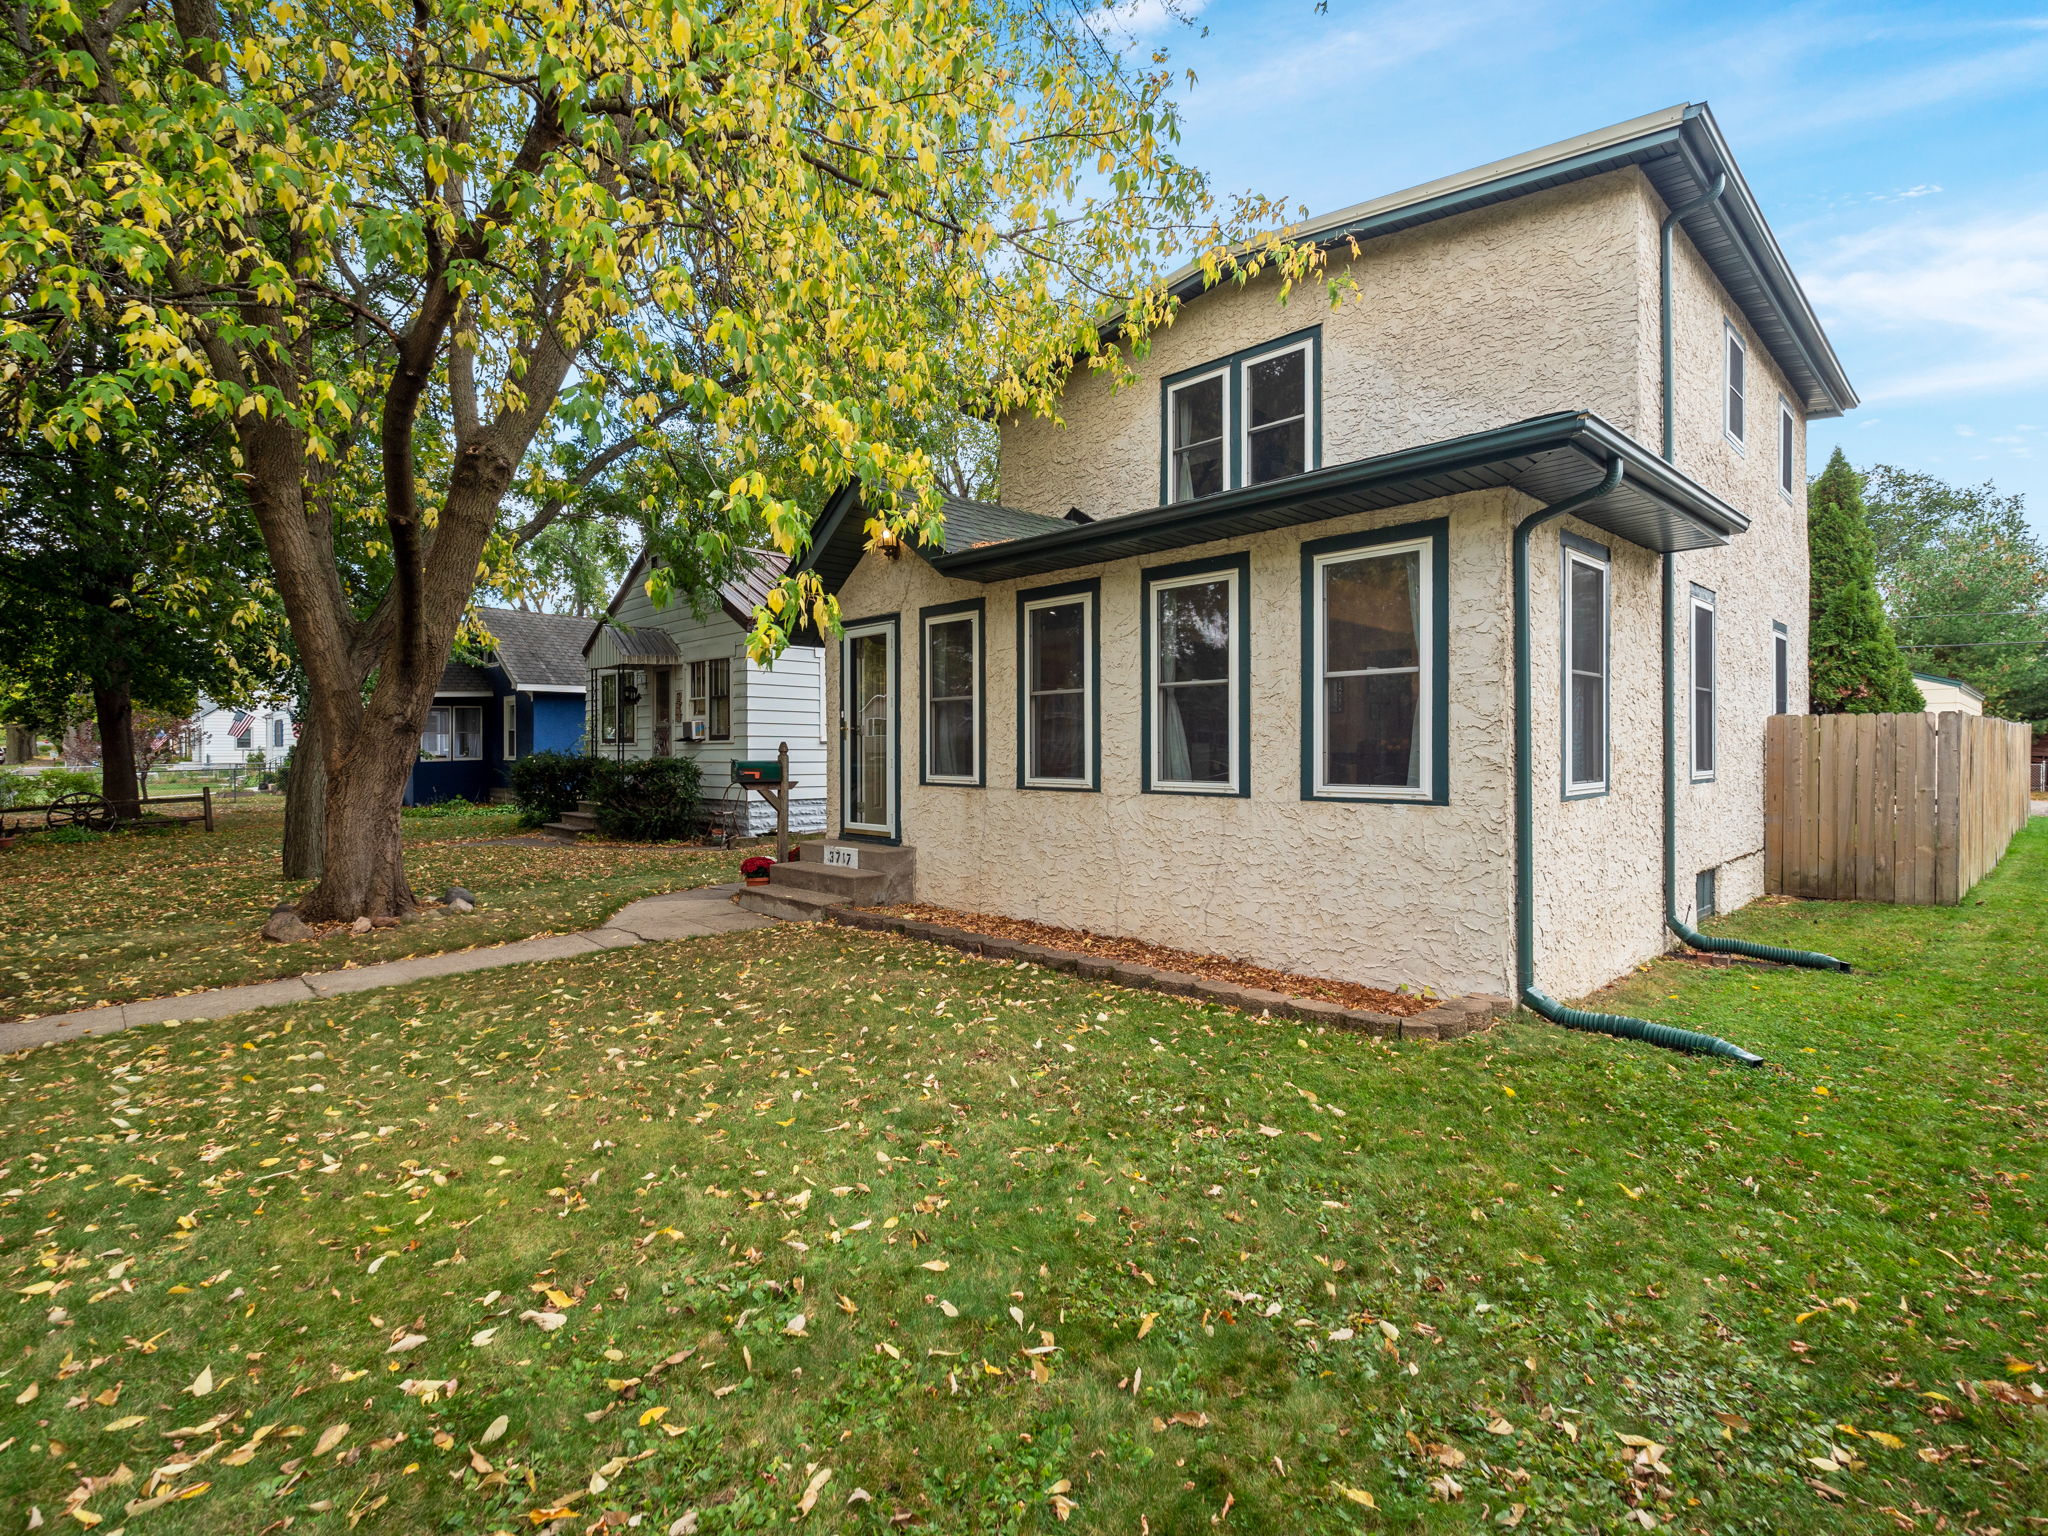  3717 Orchard Ave N, Robbinsdale, MN 55422, US Photo 27